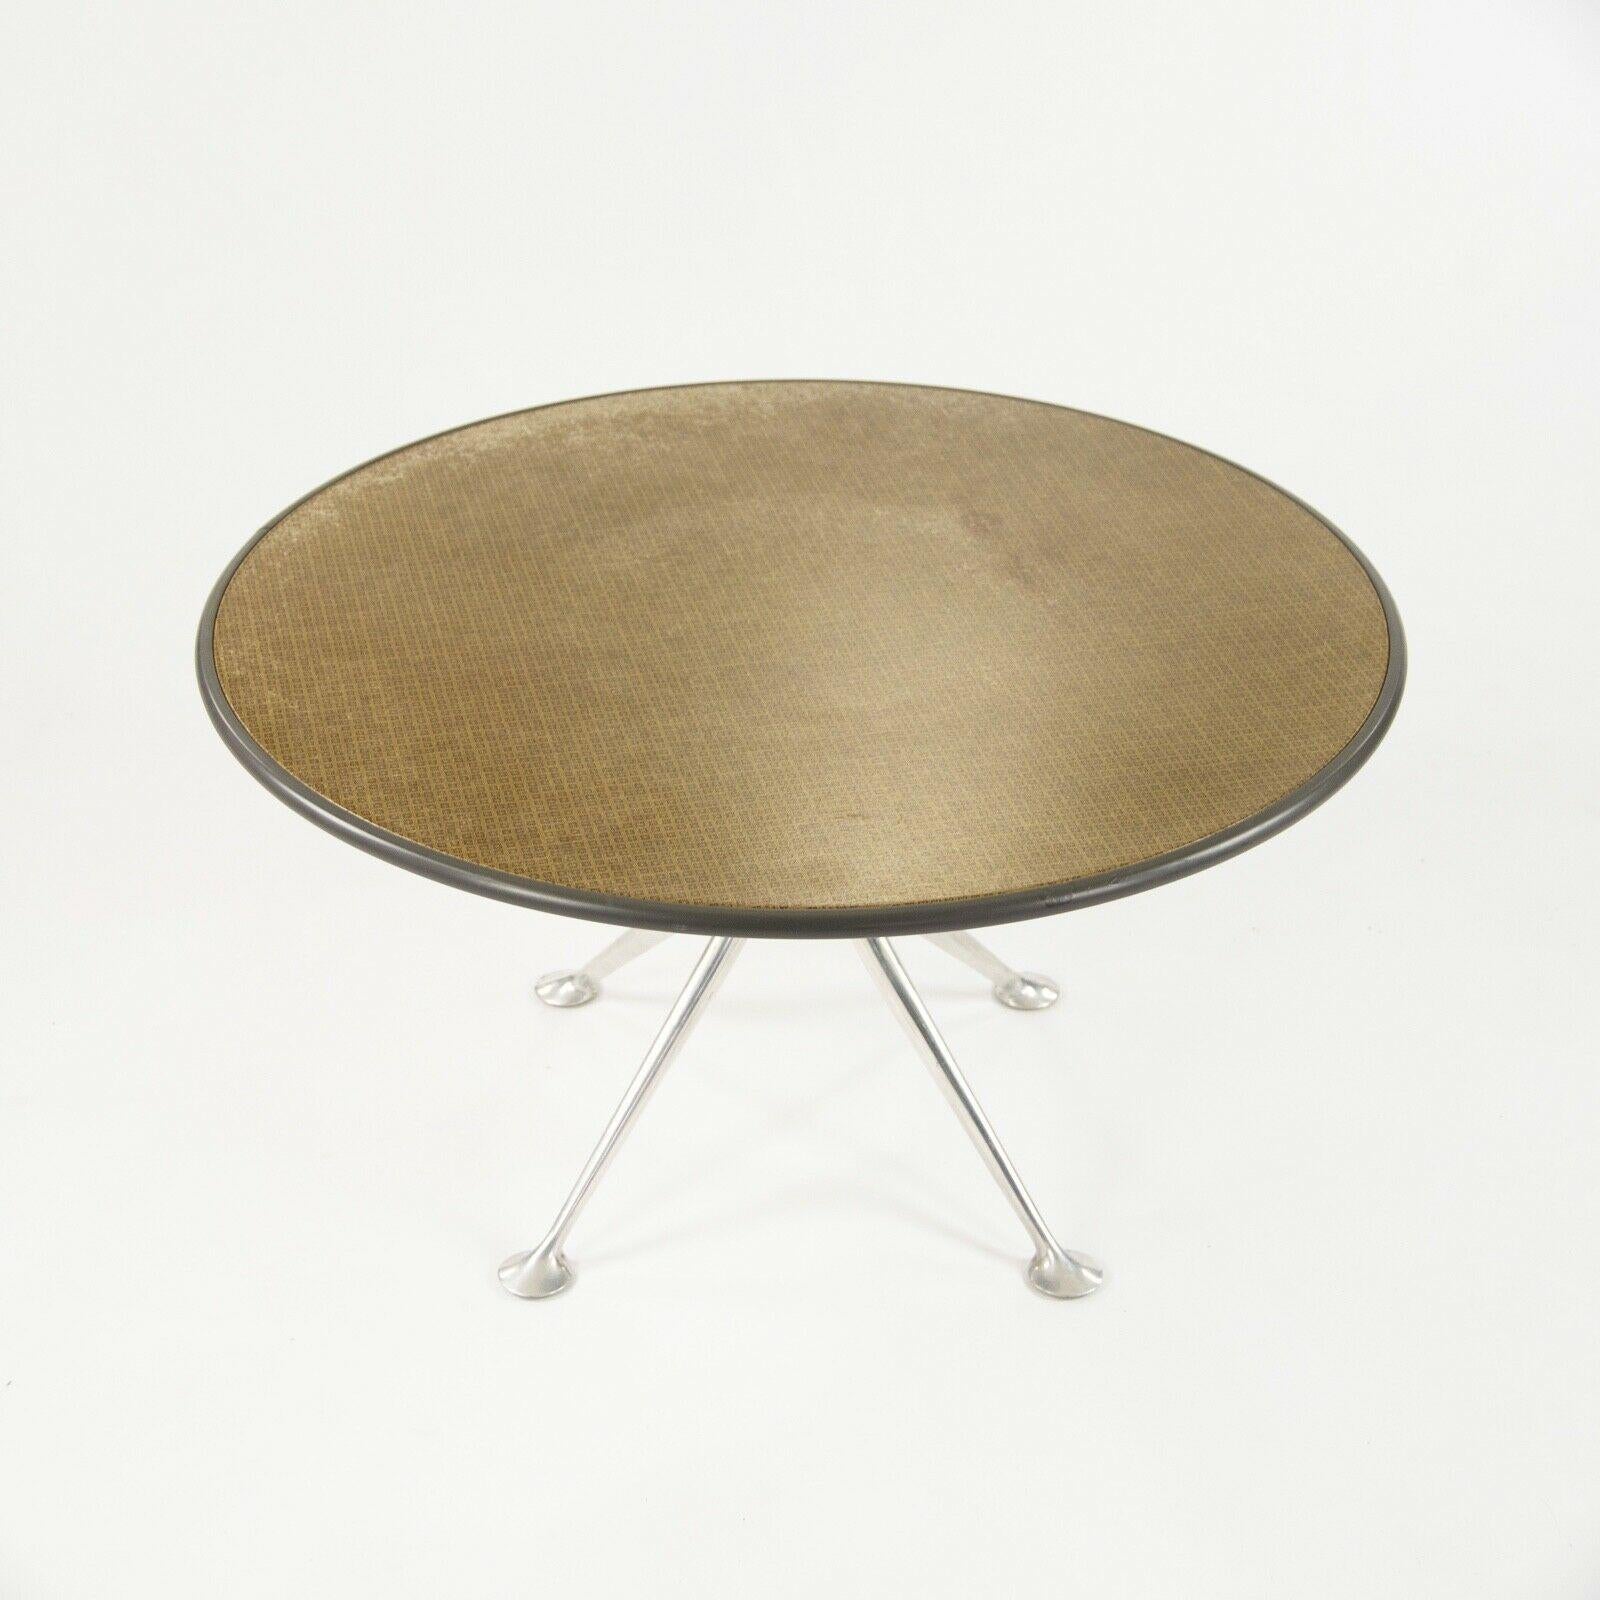 Modern 1967 Rare Alexander Girard/Ray Eames/Charles Eames Coffee Table w/ Gold Laminate For Sale